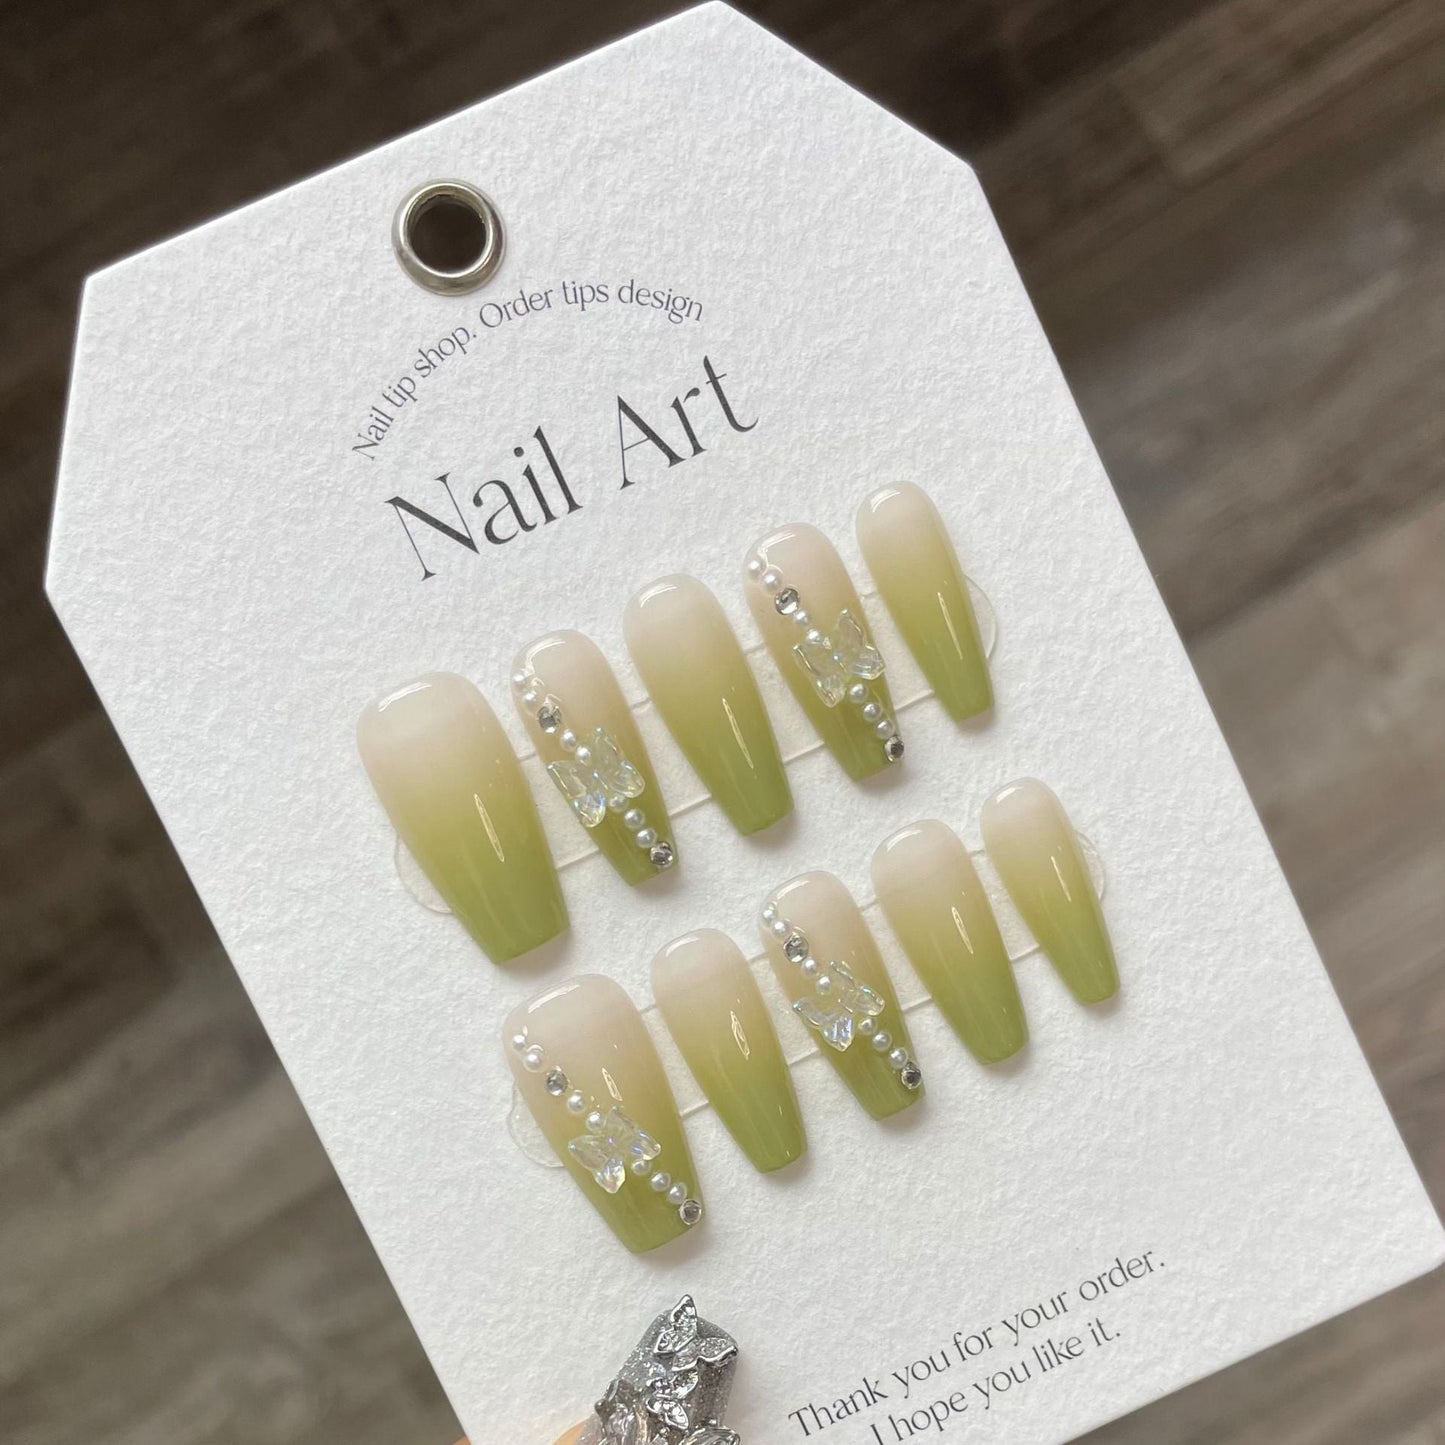 914 Green gradient style press on nails 100% handmade false nails nude clear green